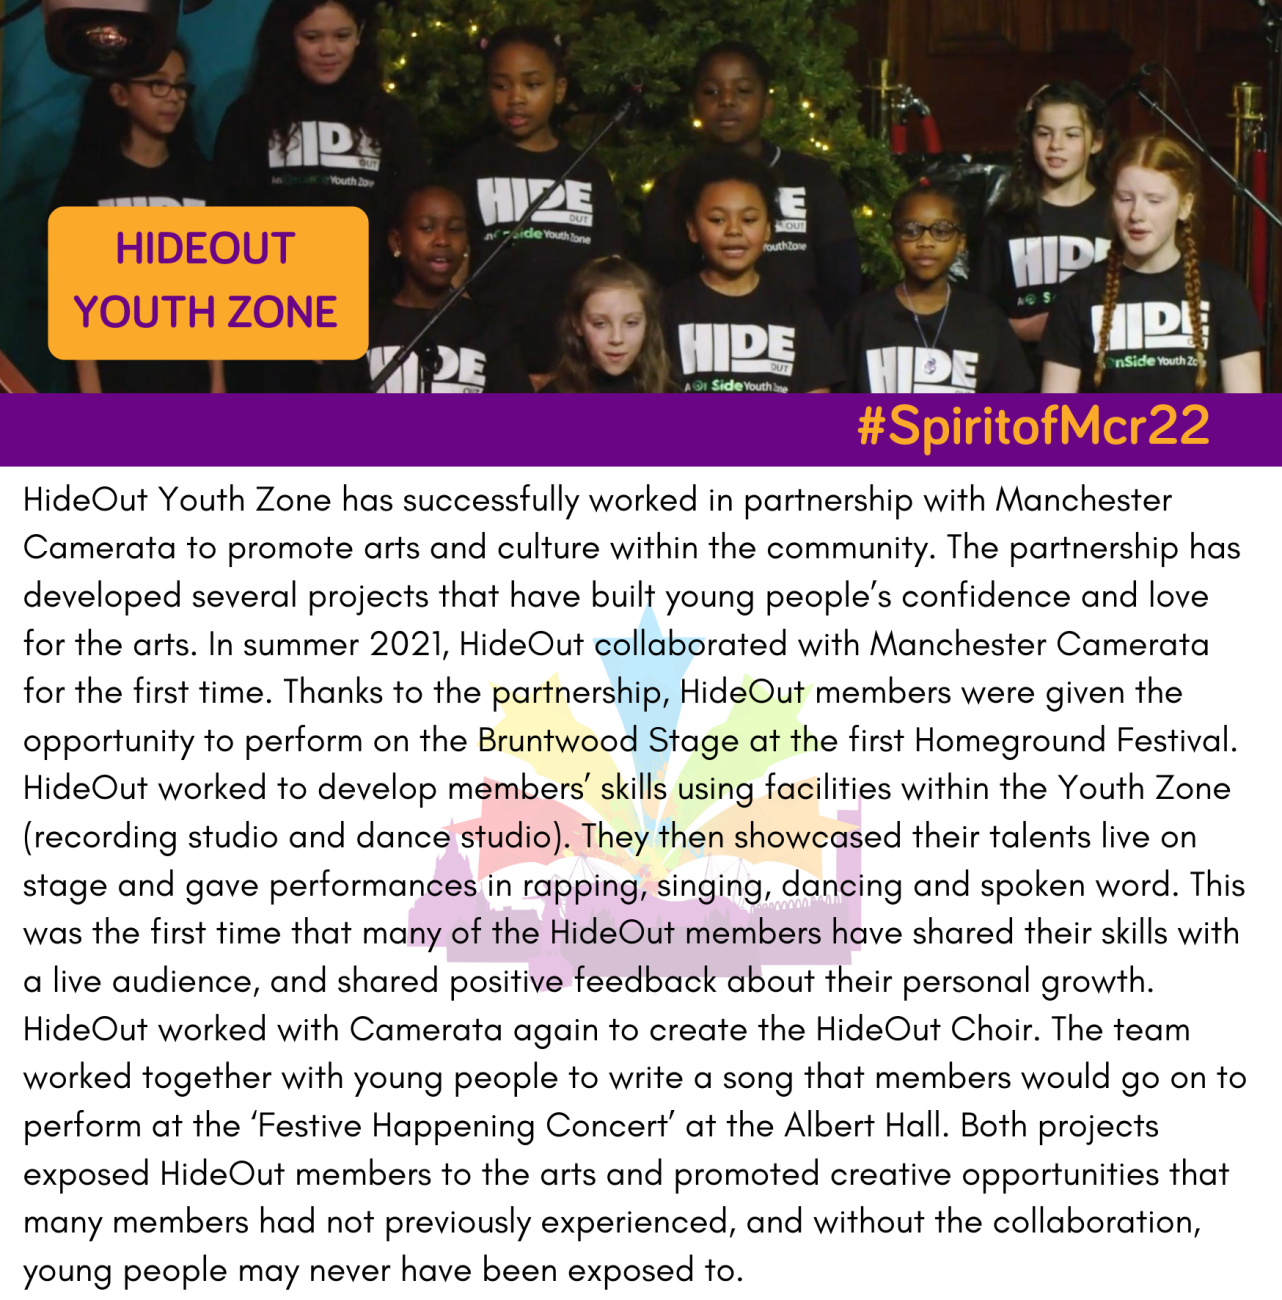 HideOut youth zone